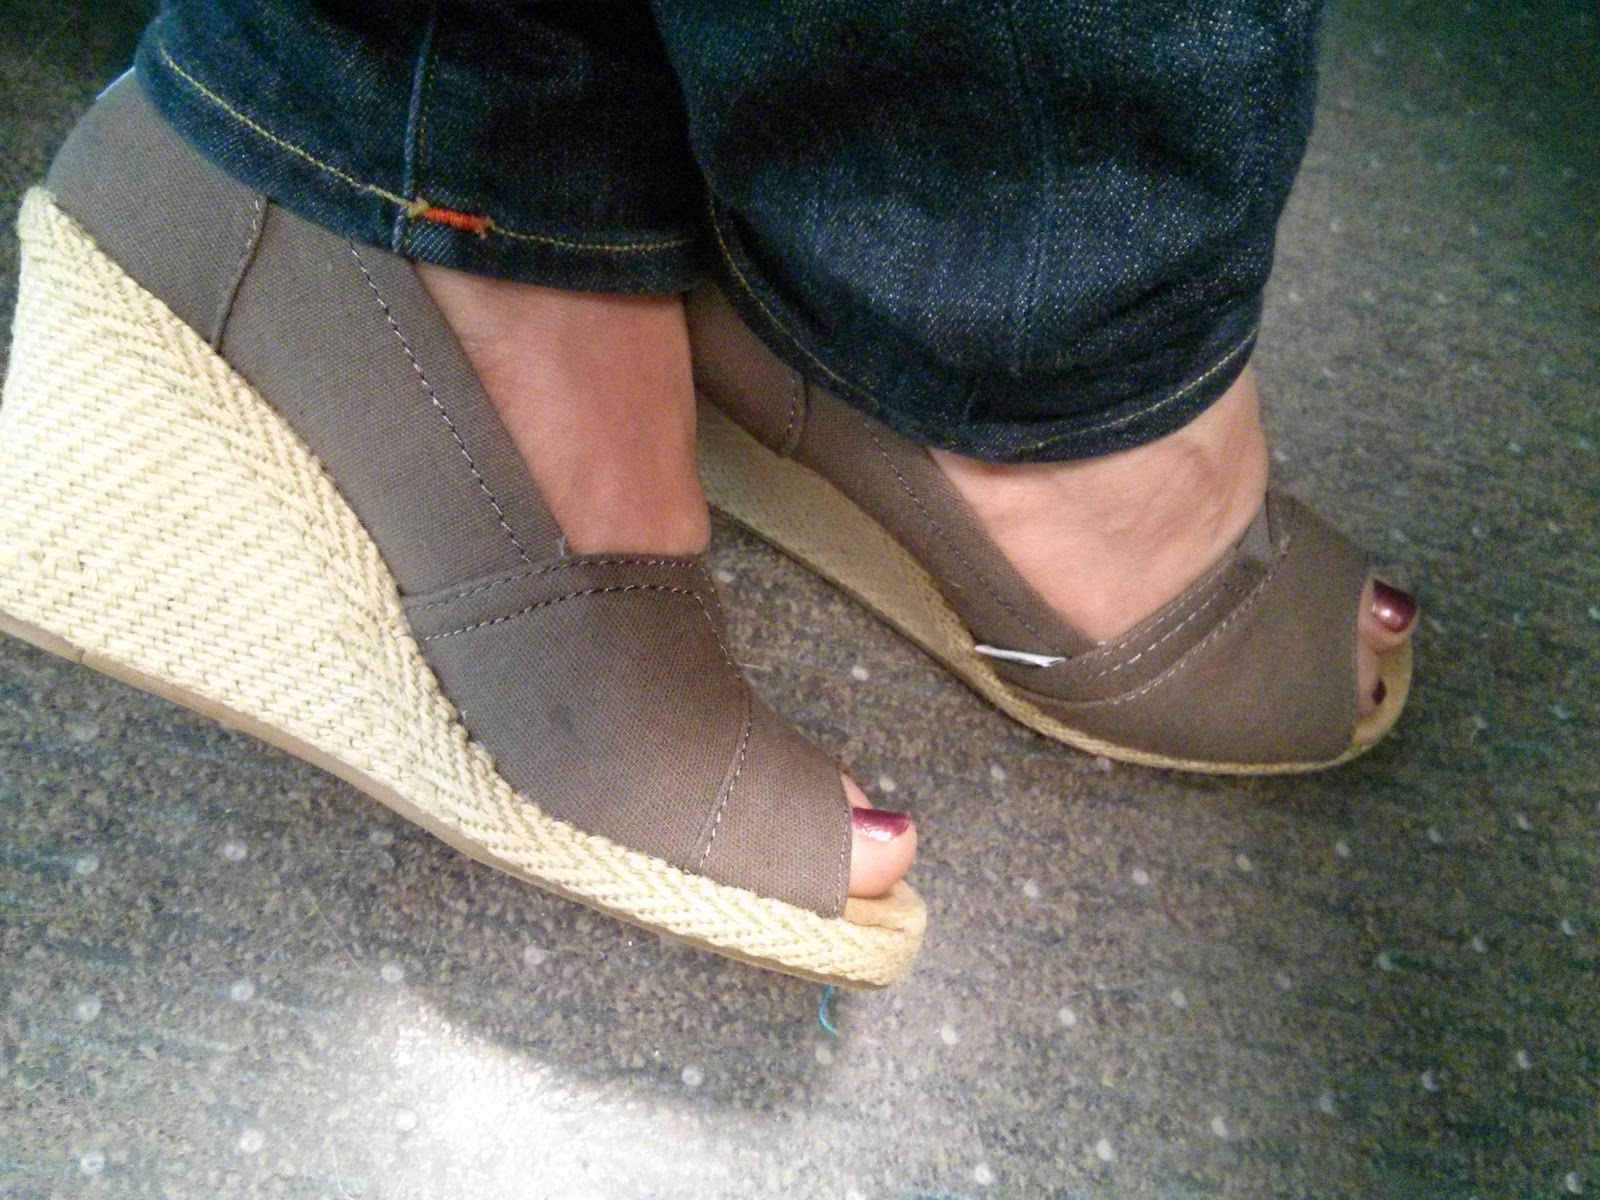 ... : Real Life, Real Reviews: Shoe Review! TOMS Calypso Canvas Wedges